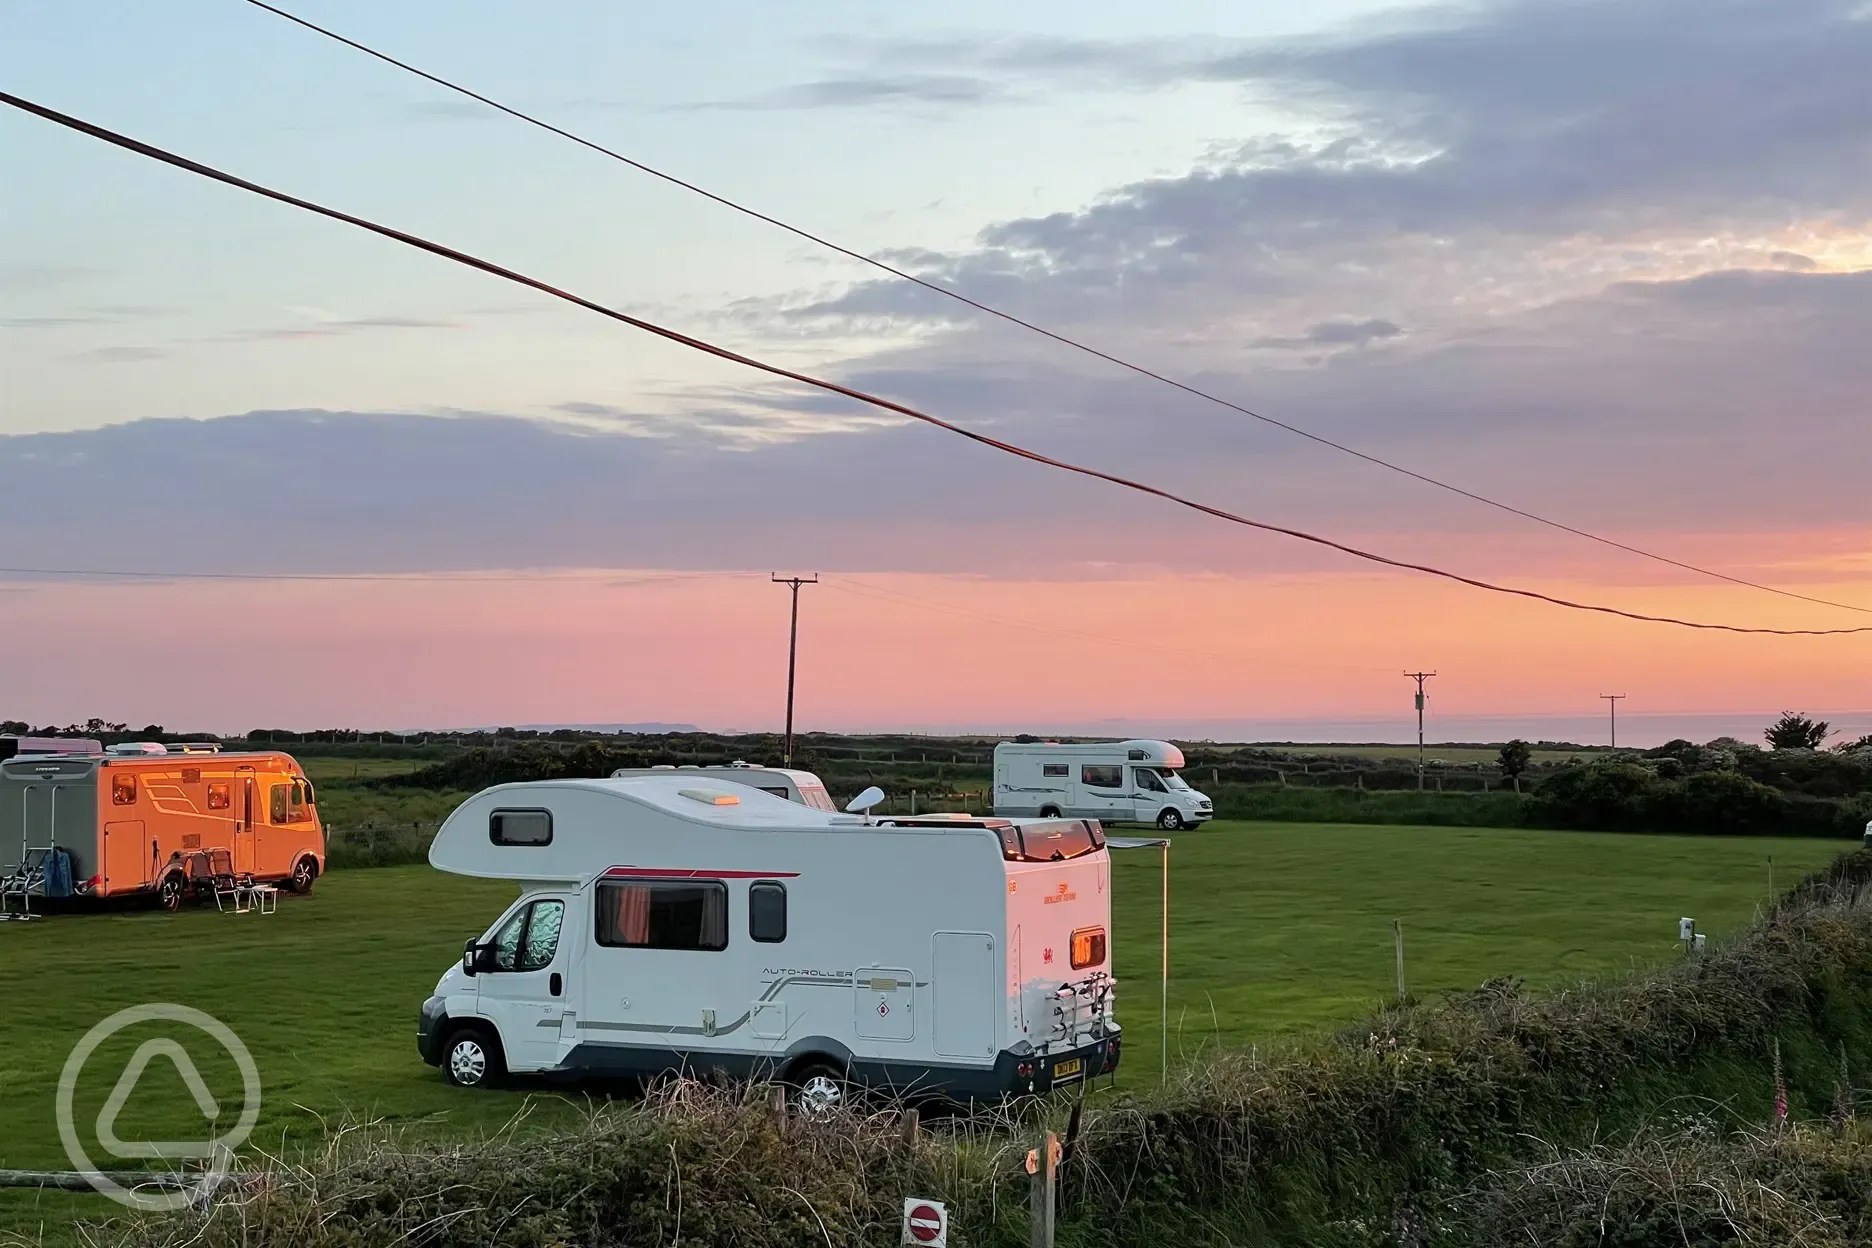  Caravan and Motorhome Club electric grass pitches